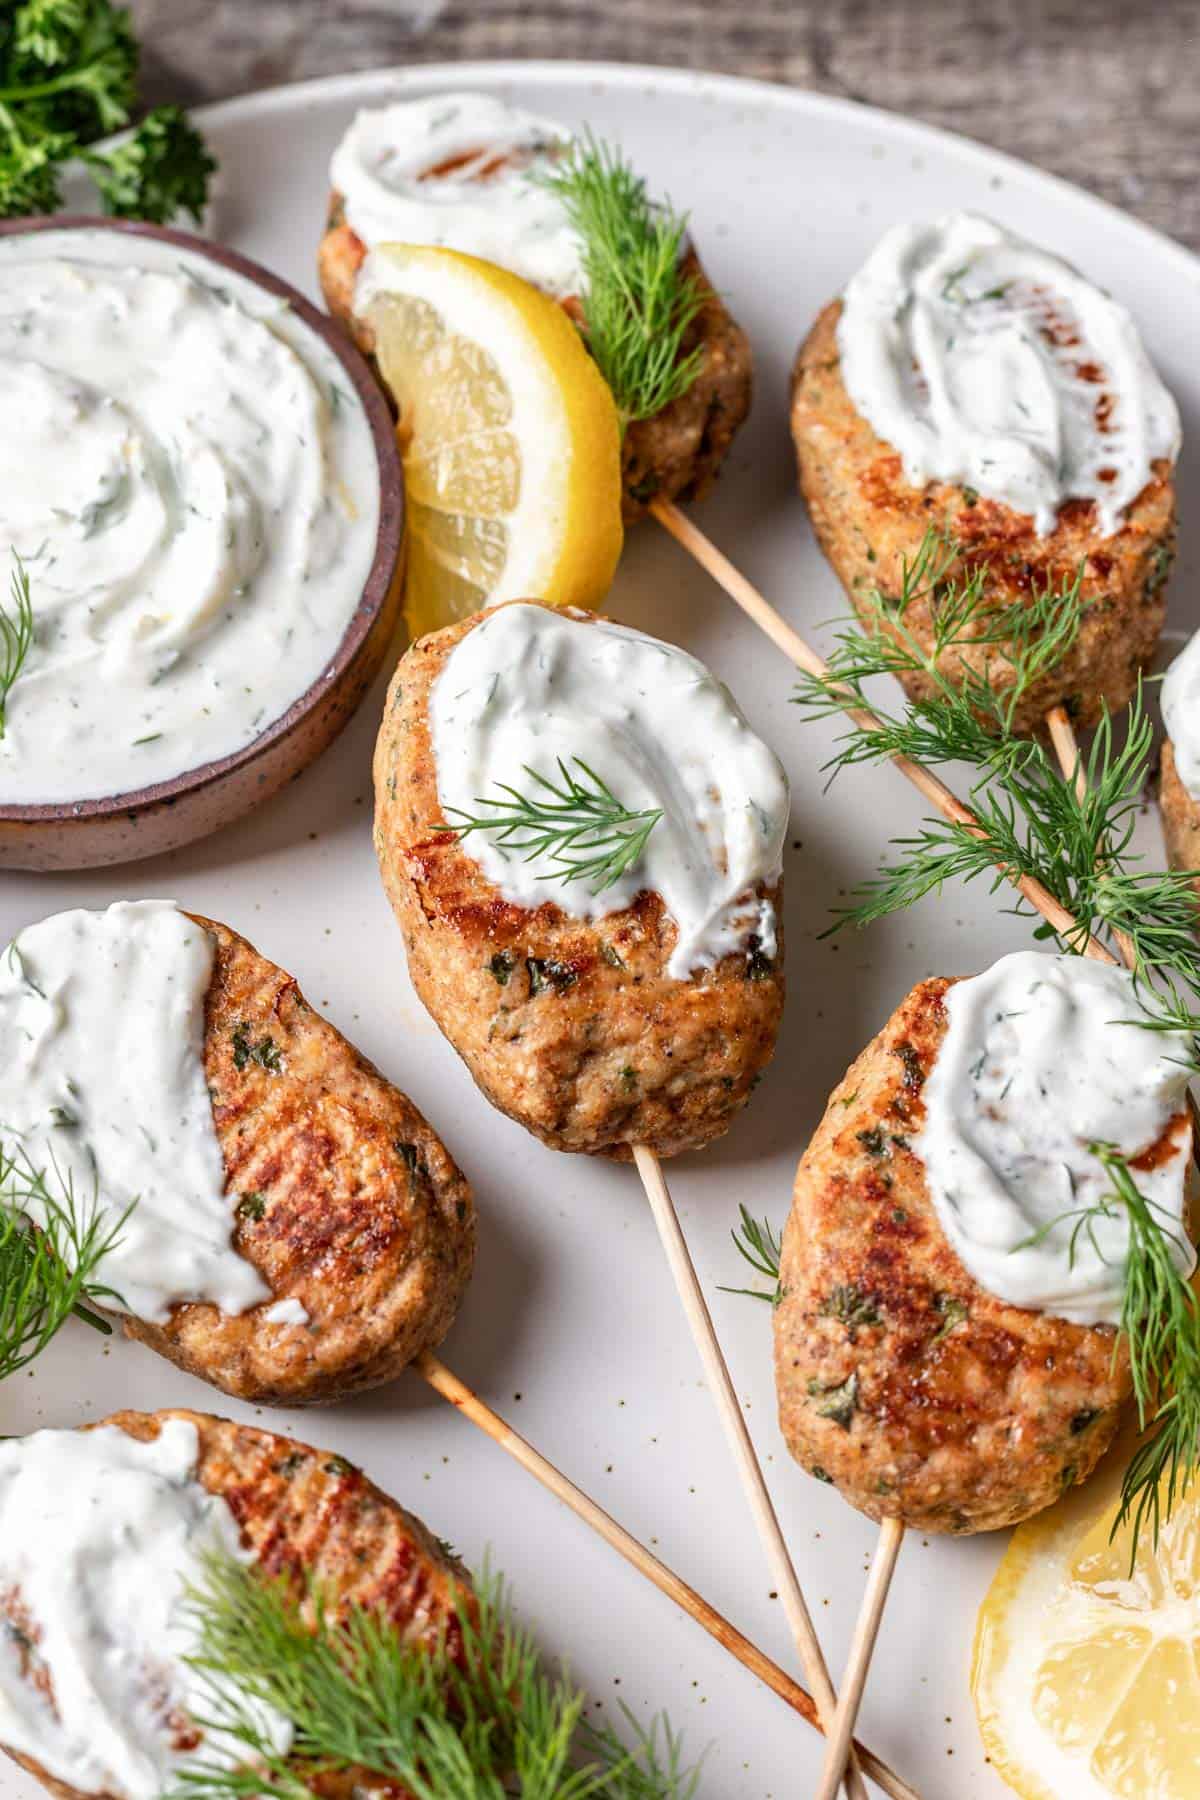 Chicken kofta kebabs topped with lemon dill yogurt sauce garnished with lemon slices and dill.